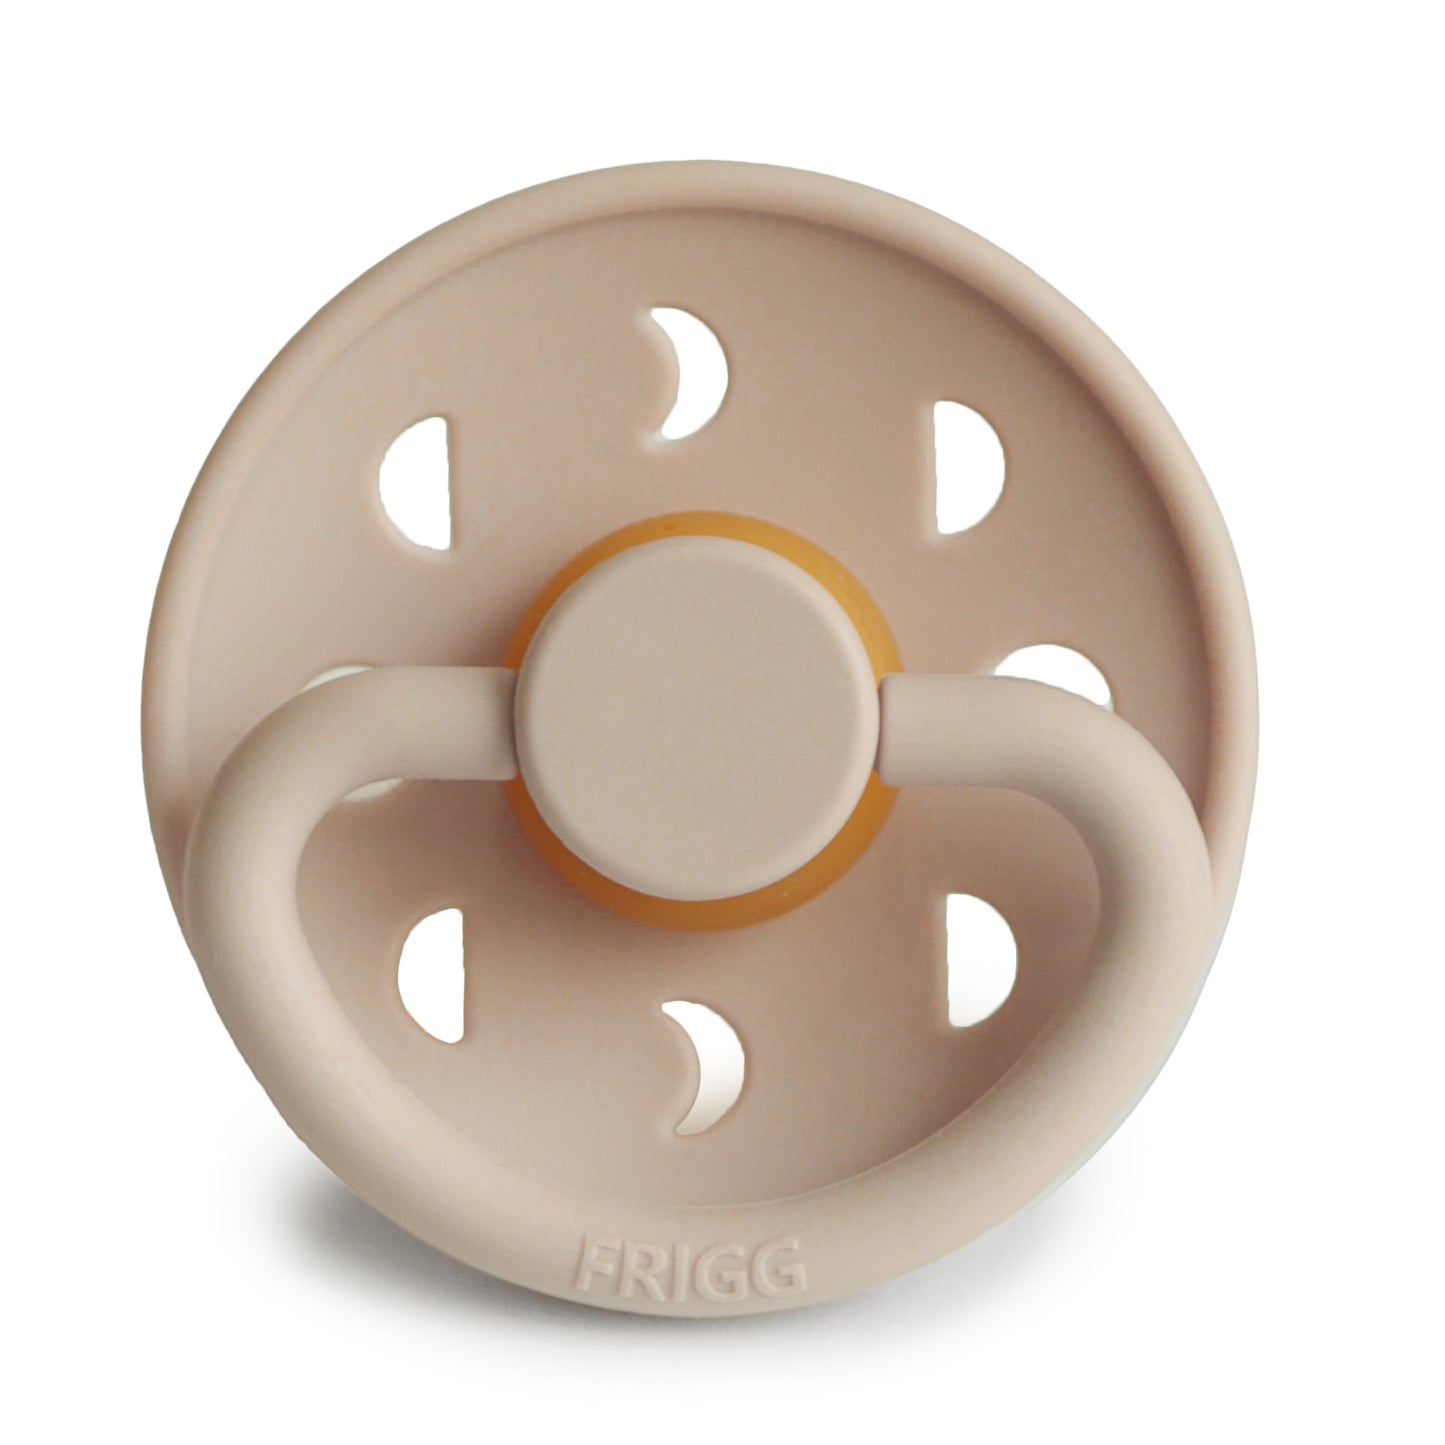 Frigg pacifier - FRIGG Moon Phase and Moon Phase Night - Size 1